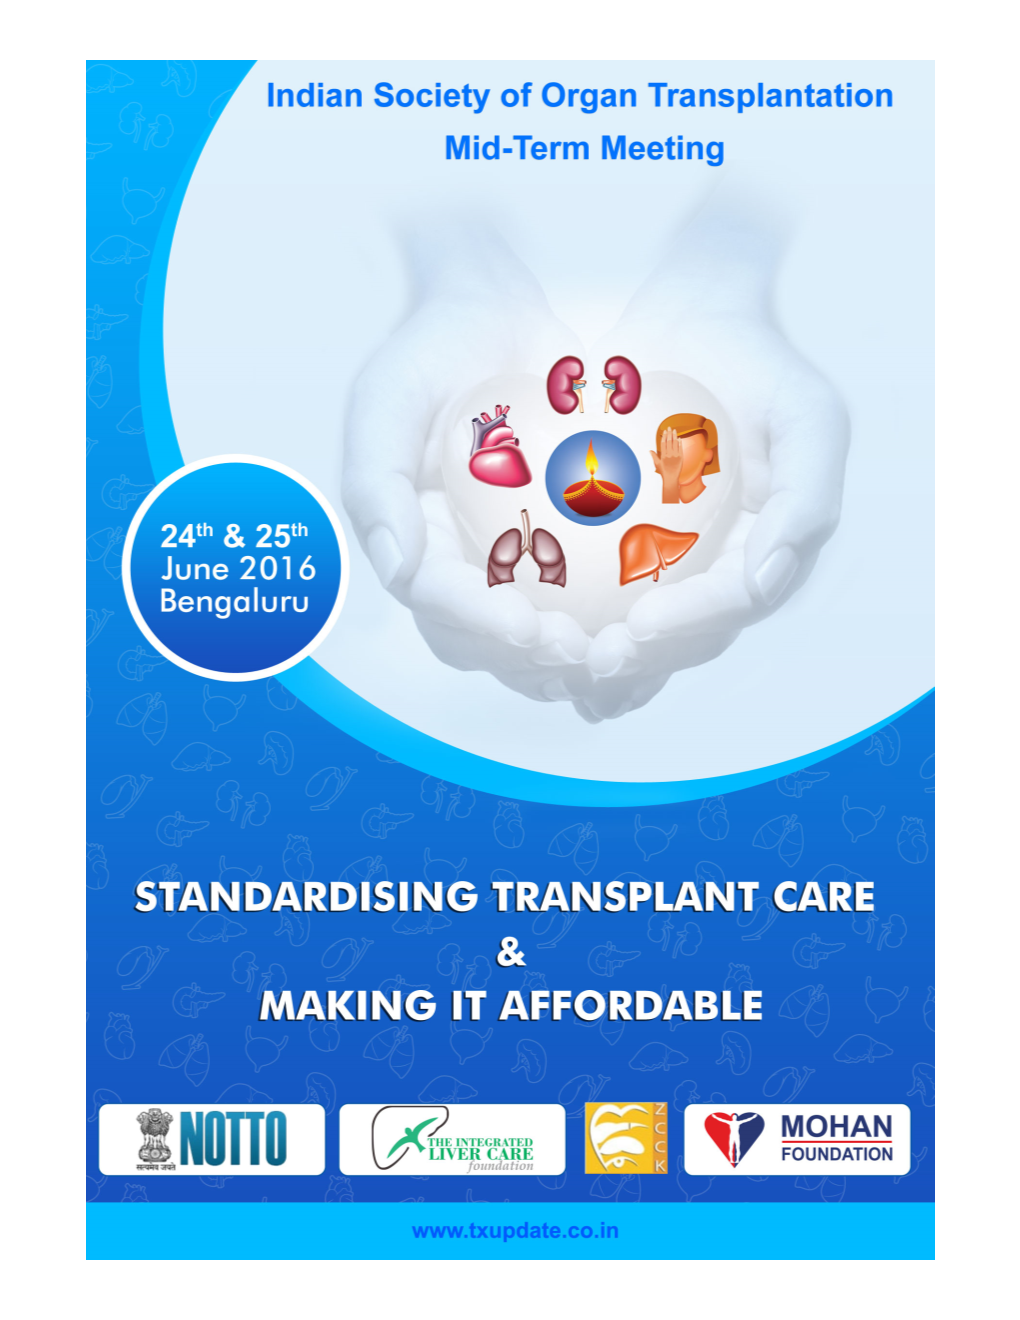 The Declaration of Istanbul on Organ Trafficking and Transplant Tourism